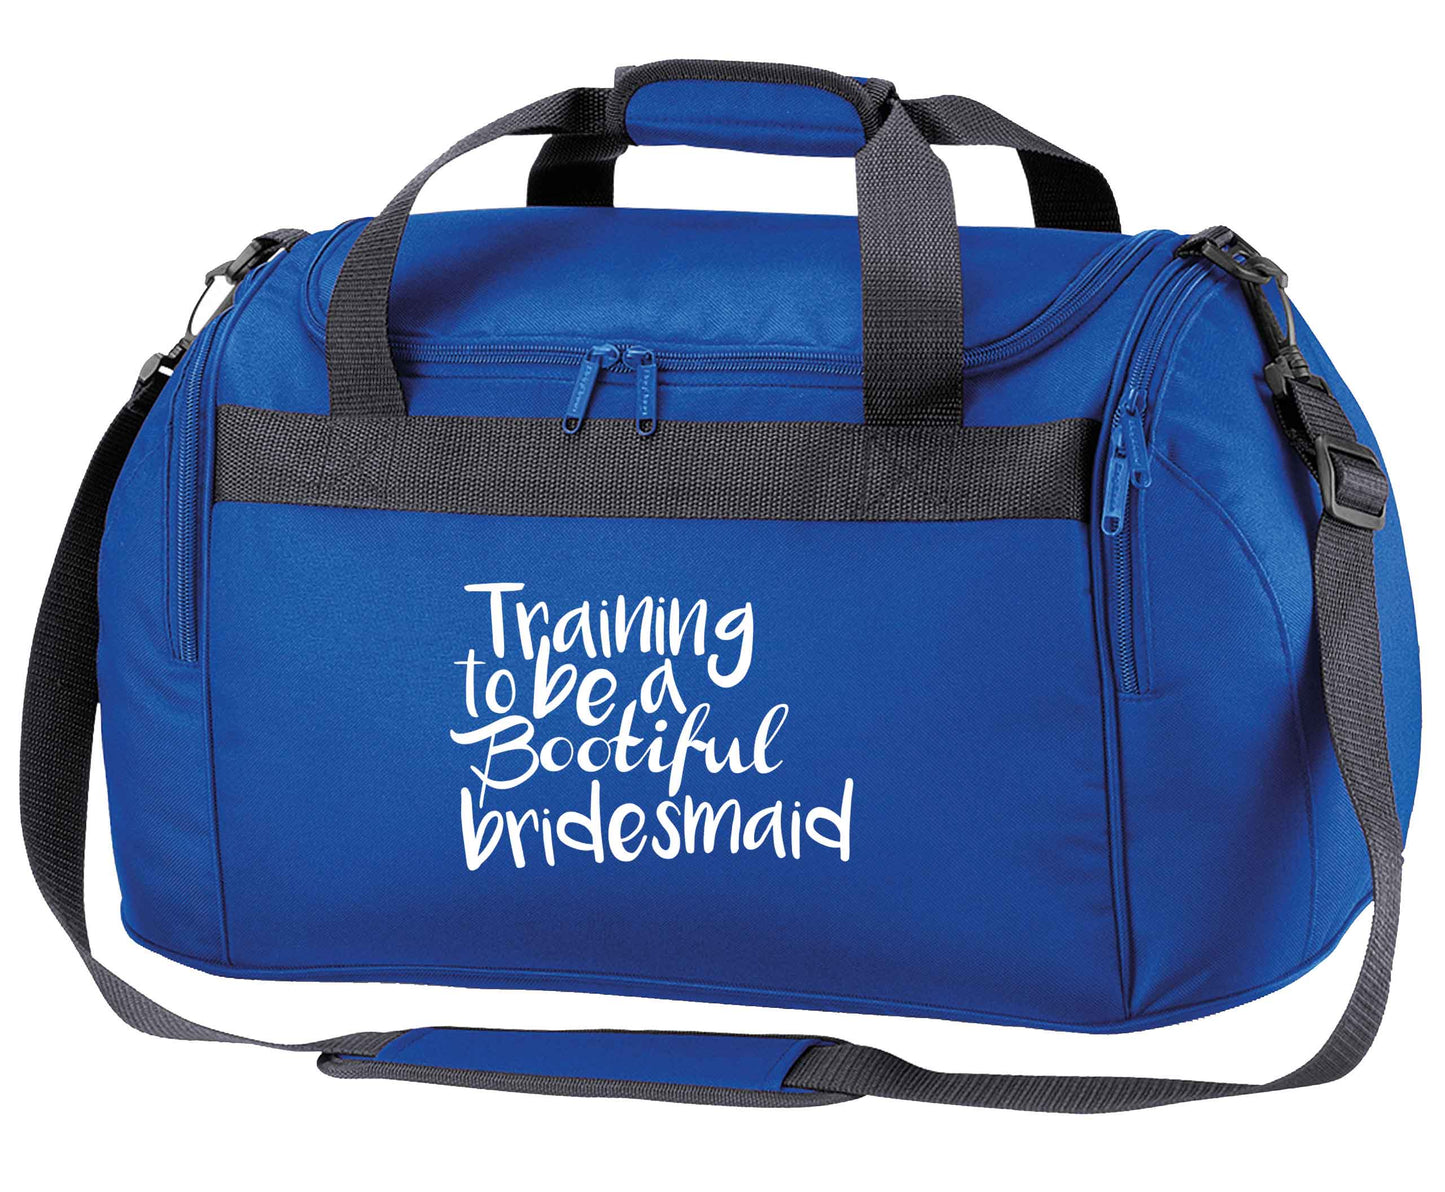 Get motivated and get fit for your big day! Our workout quotes and designs will get you ready to sweat! Perfect for any bride, groom or bridesmaid to be!  royal blue holdall / duffel bag